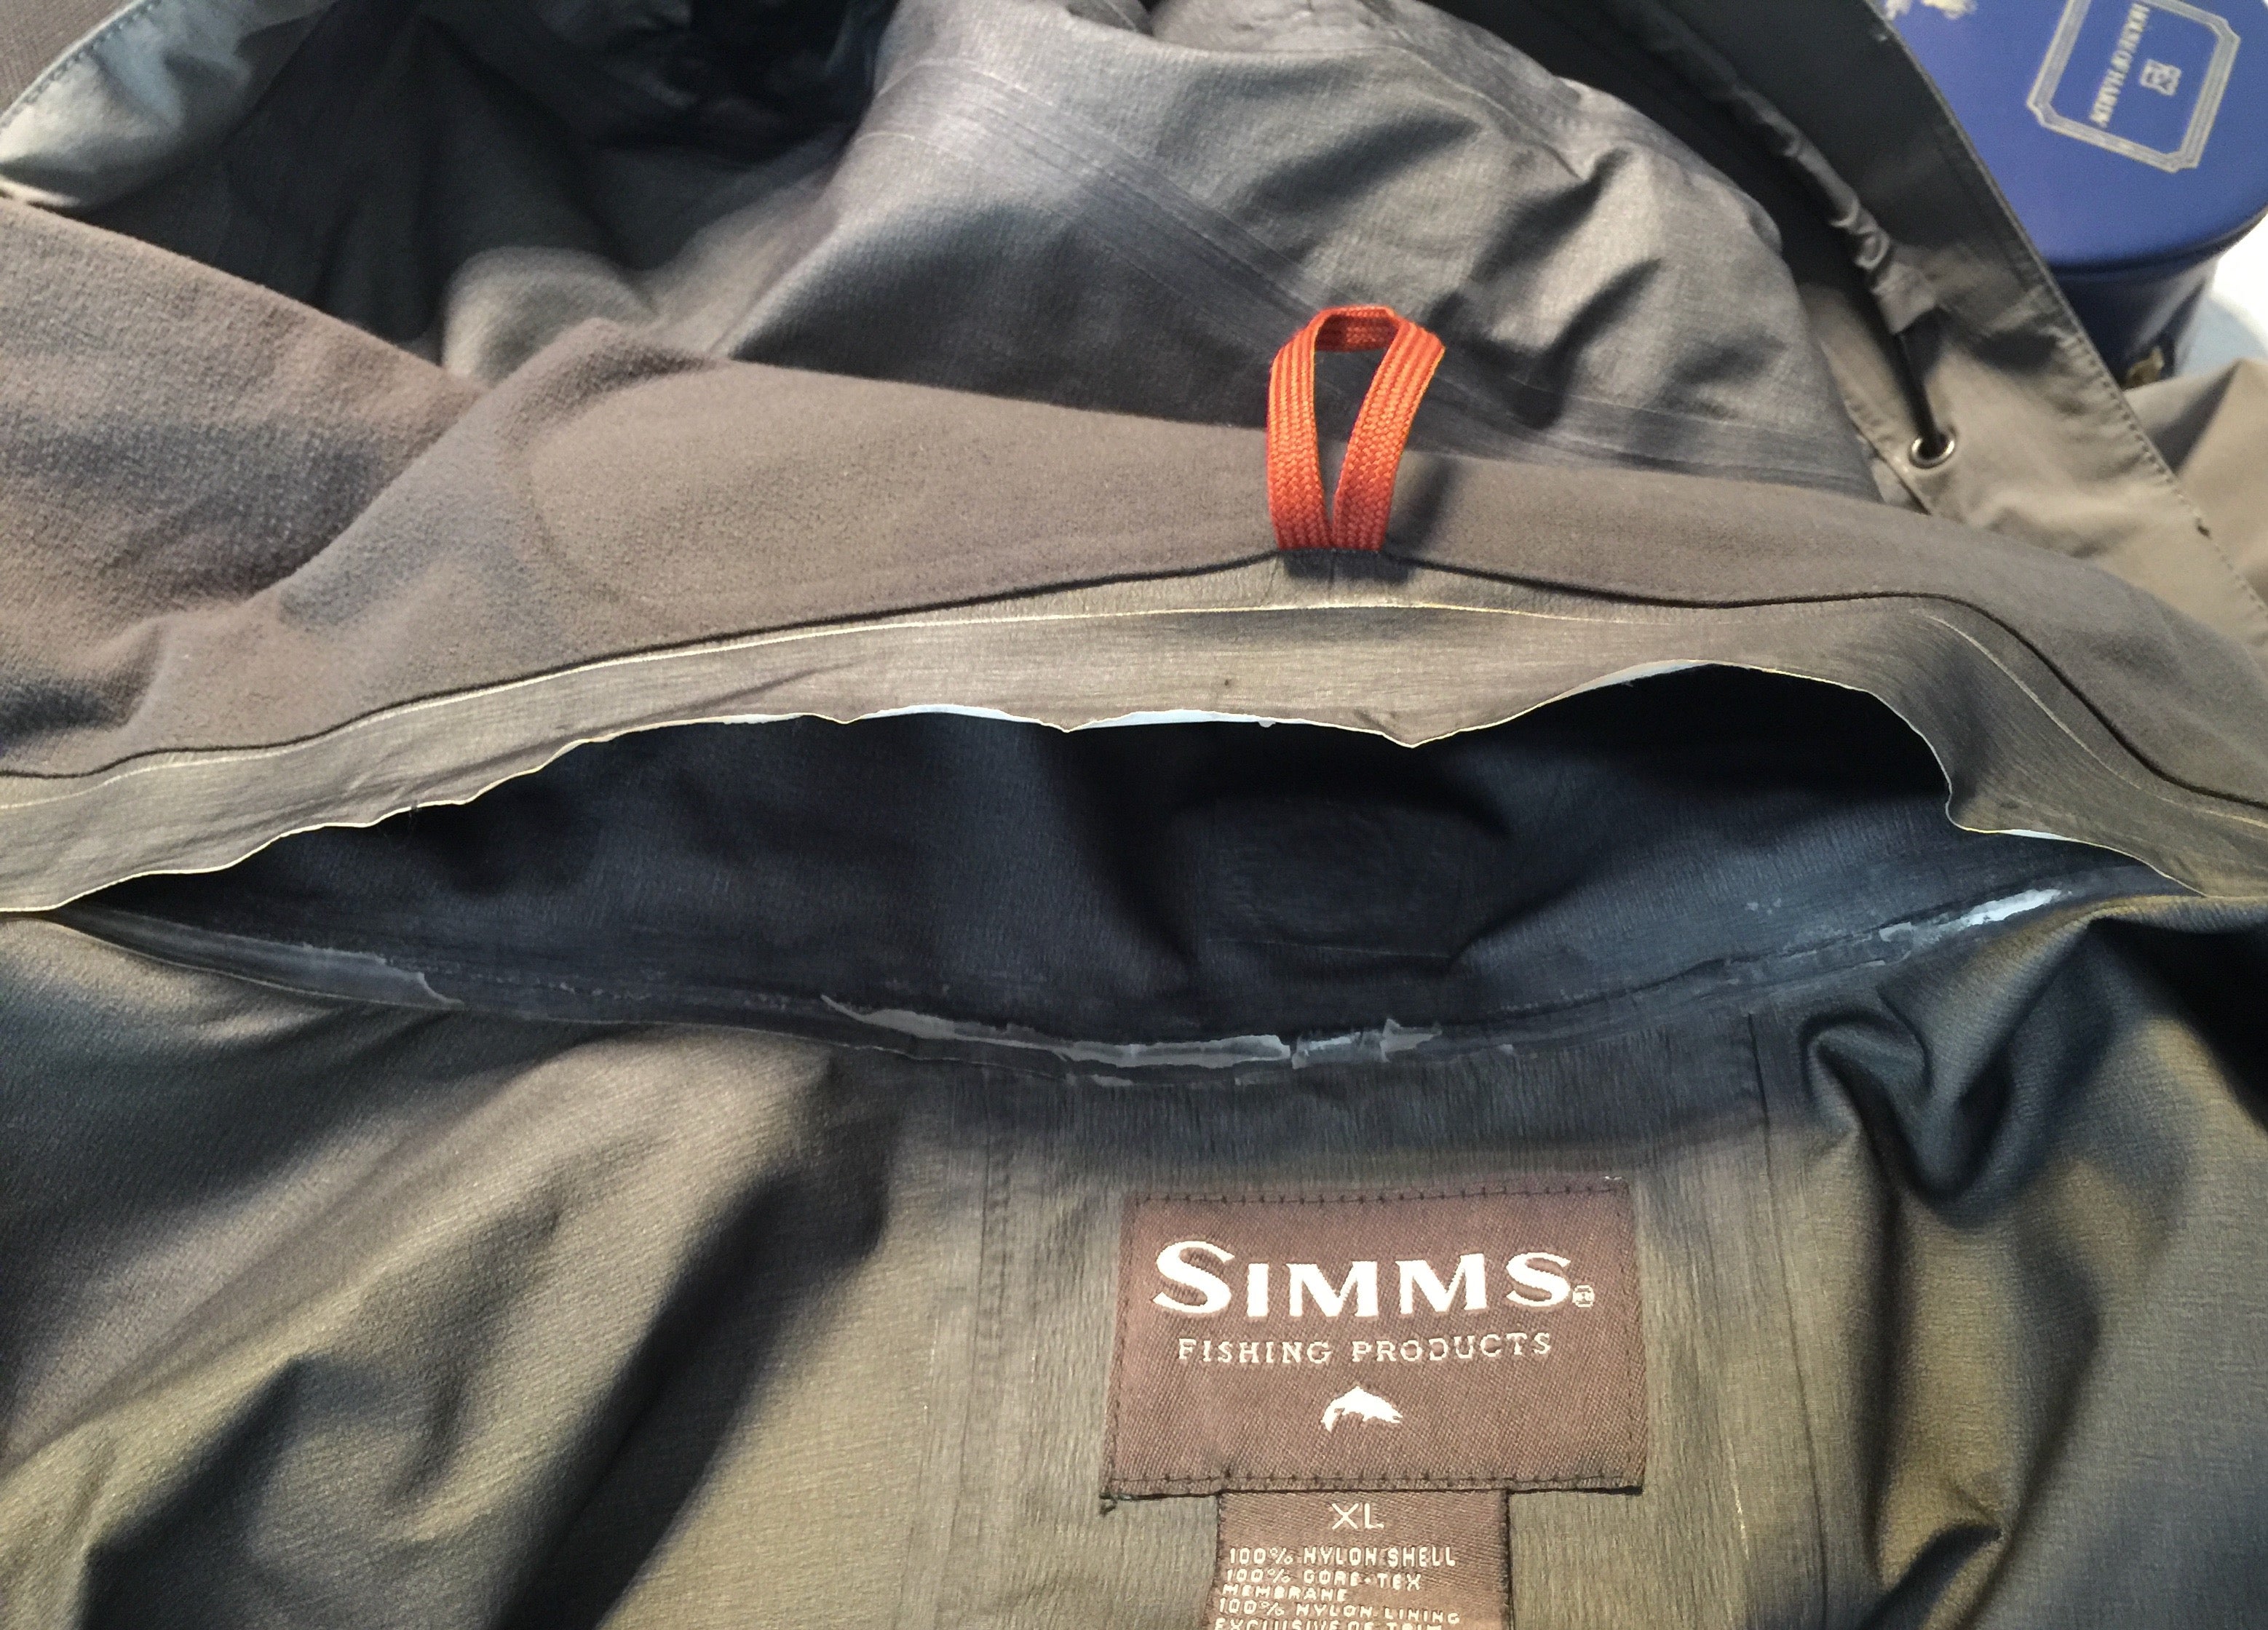 Need the best glue for a Simms jacket repair